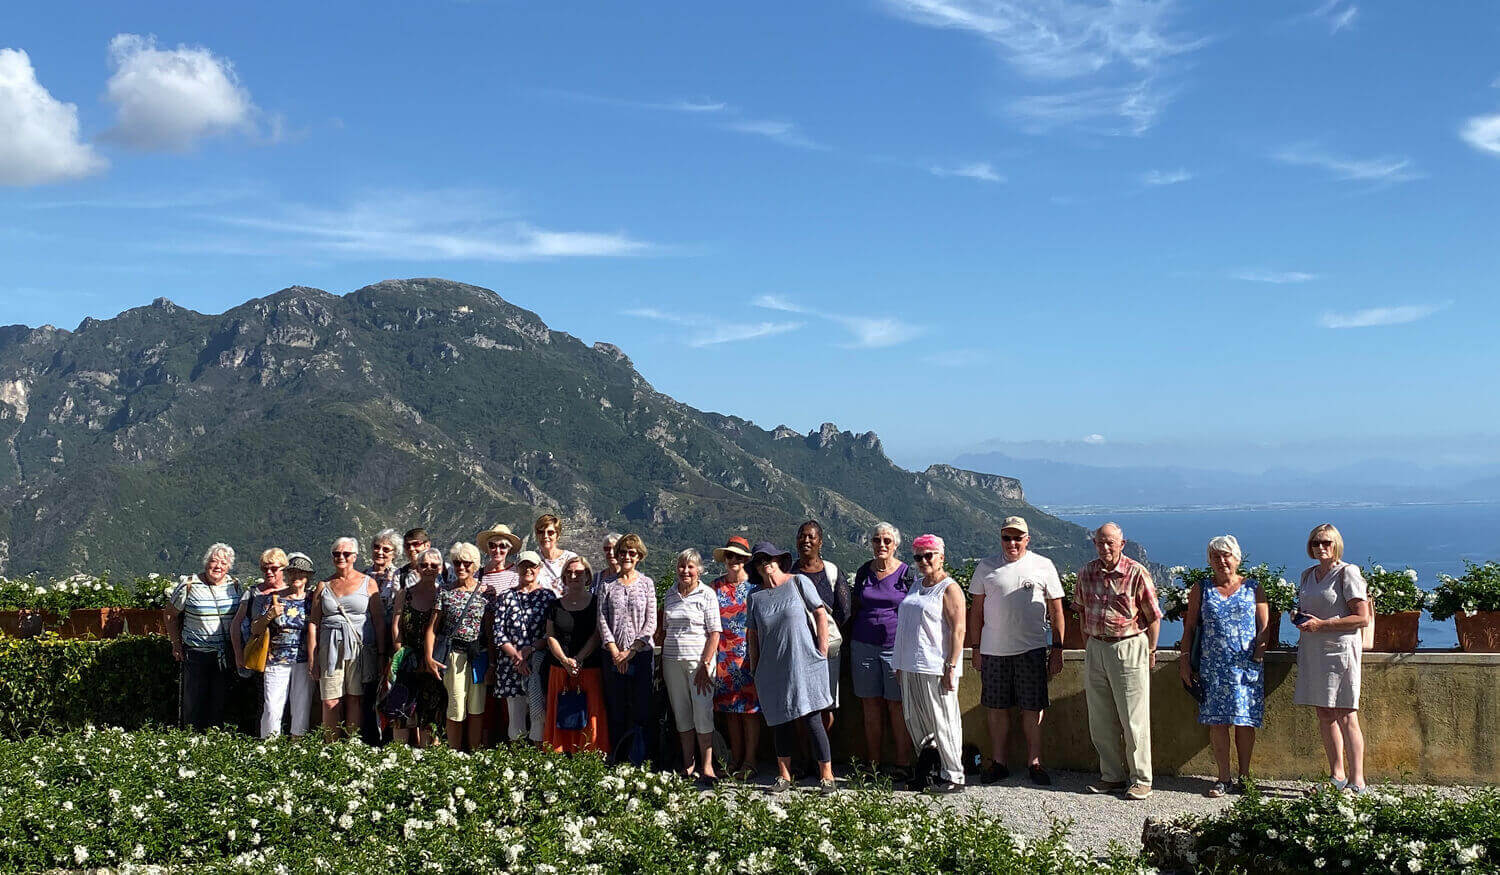 The One Traveller group in Sorrento